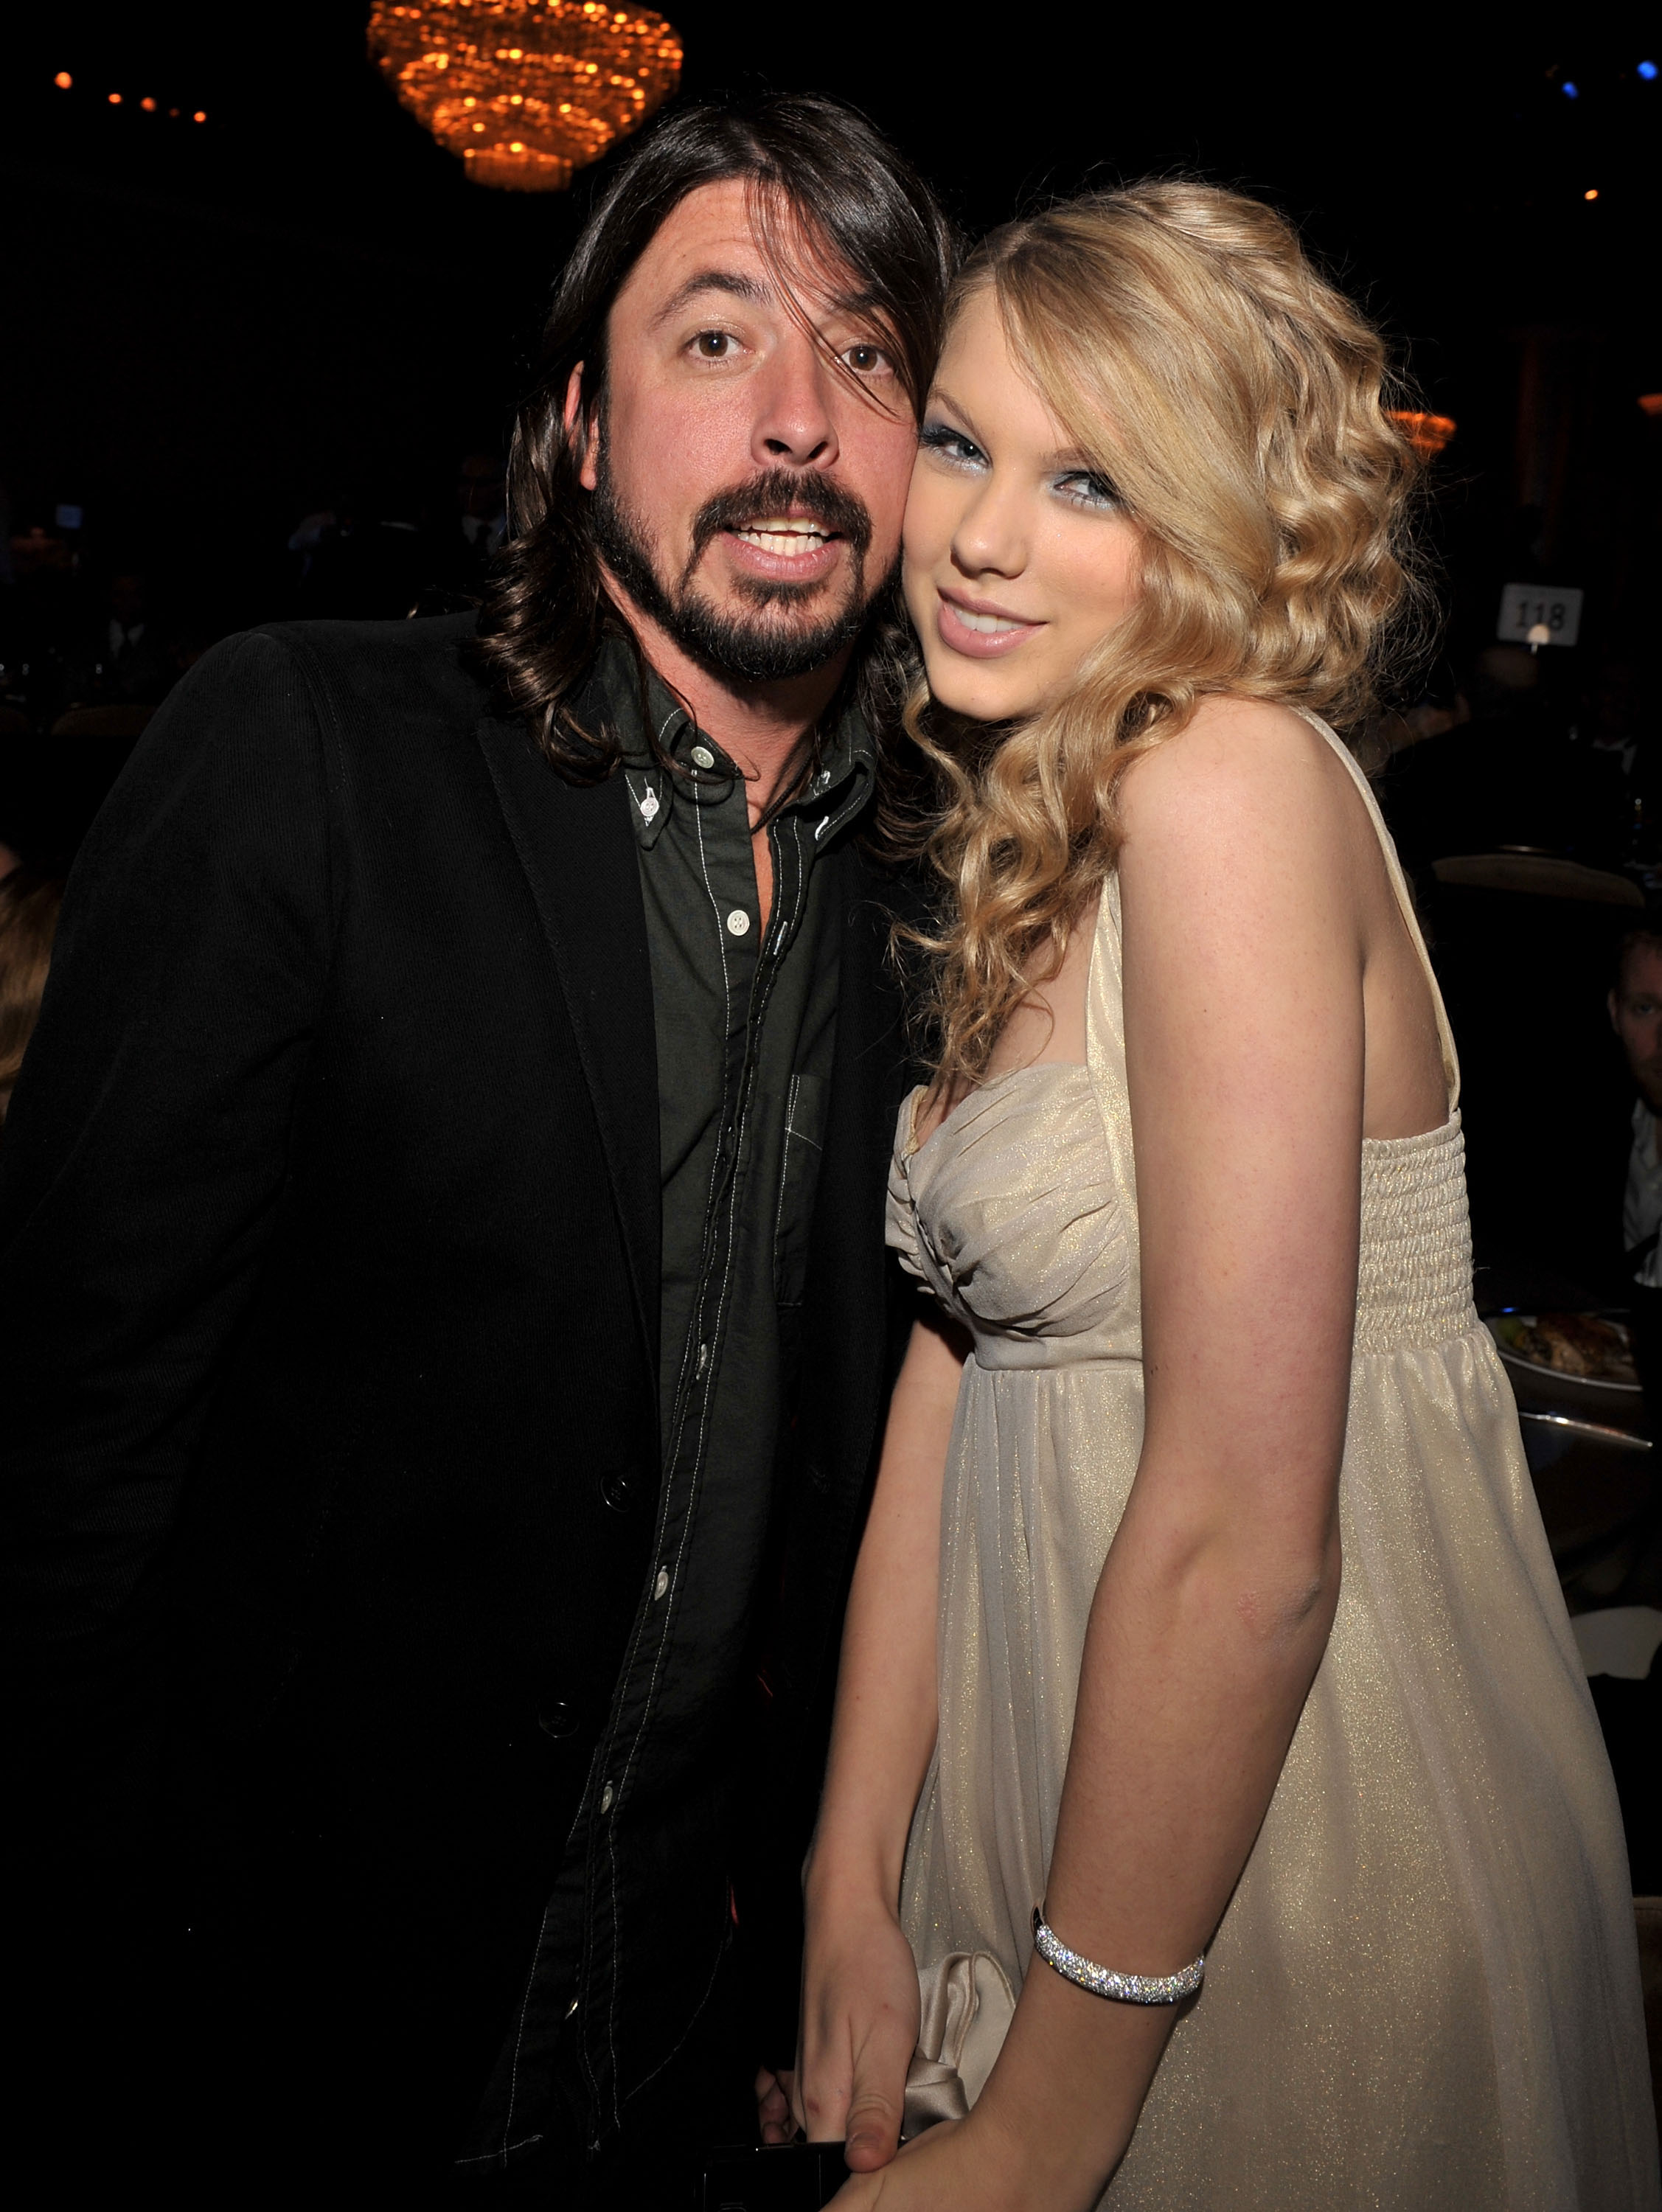 David Grohl and Taylor Swift at the Clive Davis Pre-Grammy party in Los Angeles, California on February 9, 2008 | Source: Getty Images